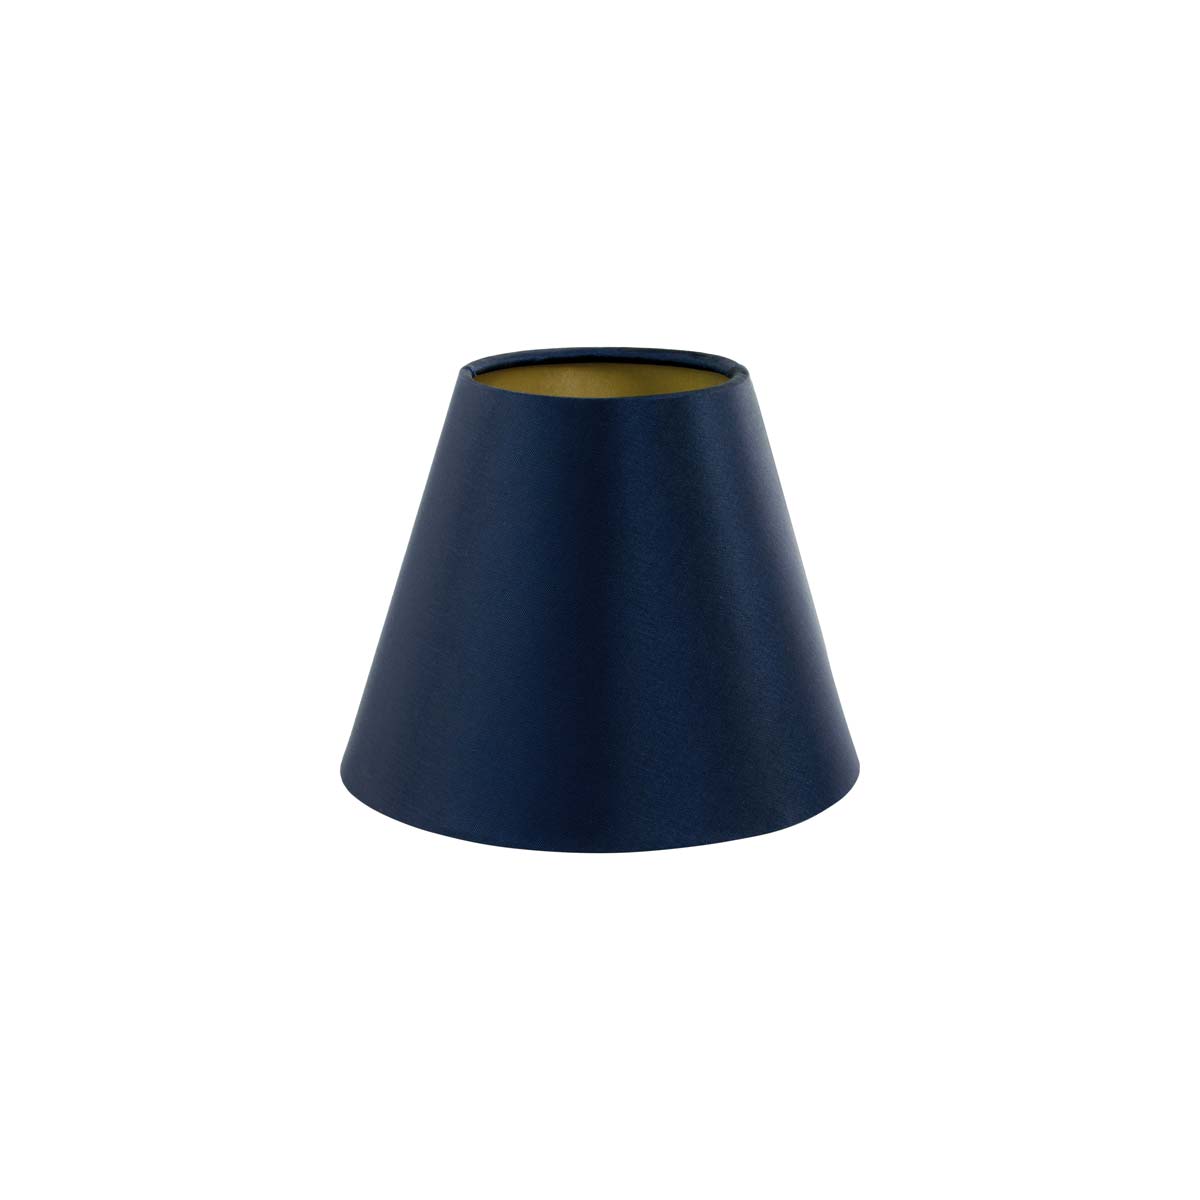 Navy blue candle clip shade with gold lining.